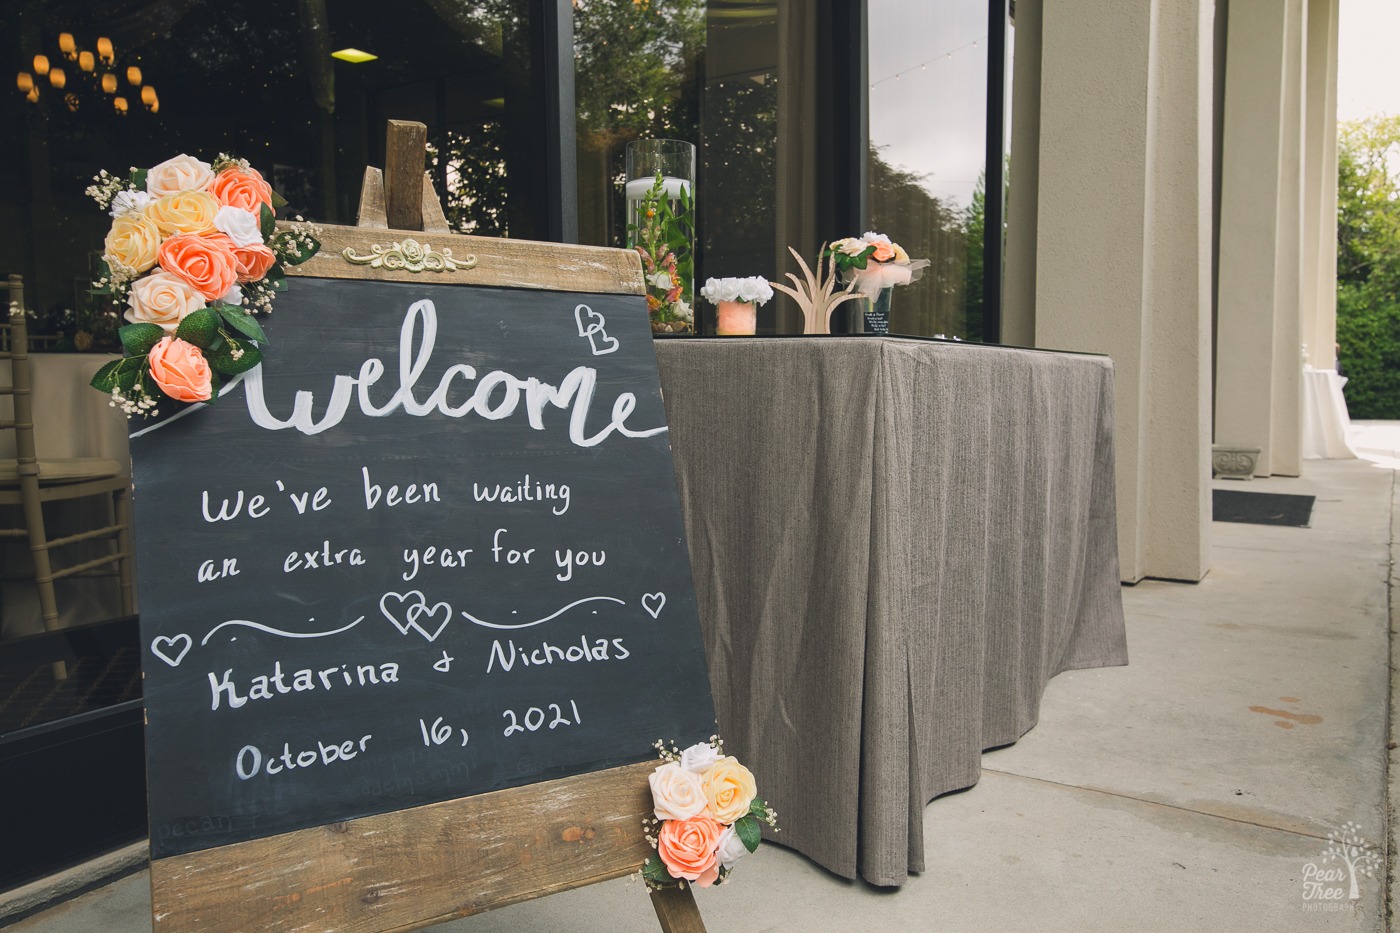 Chalkboard sign outside The Atrium welcoming wedding guests after waiting an extra year because of the pandemic